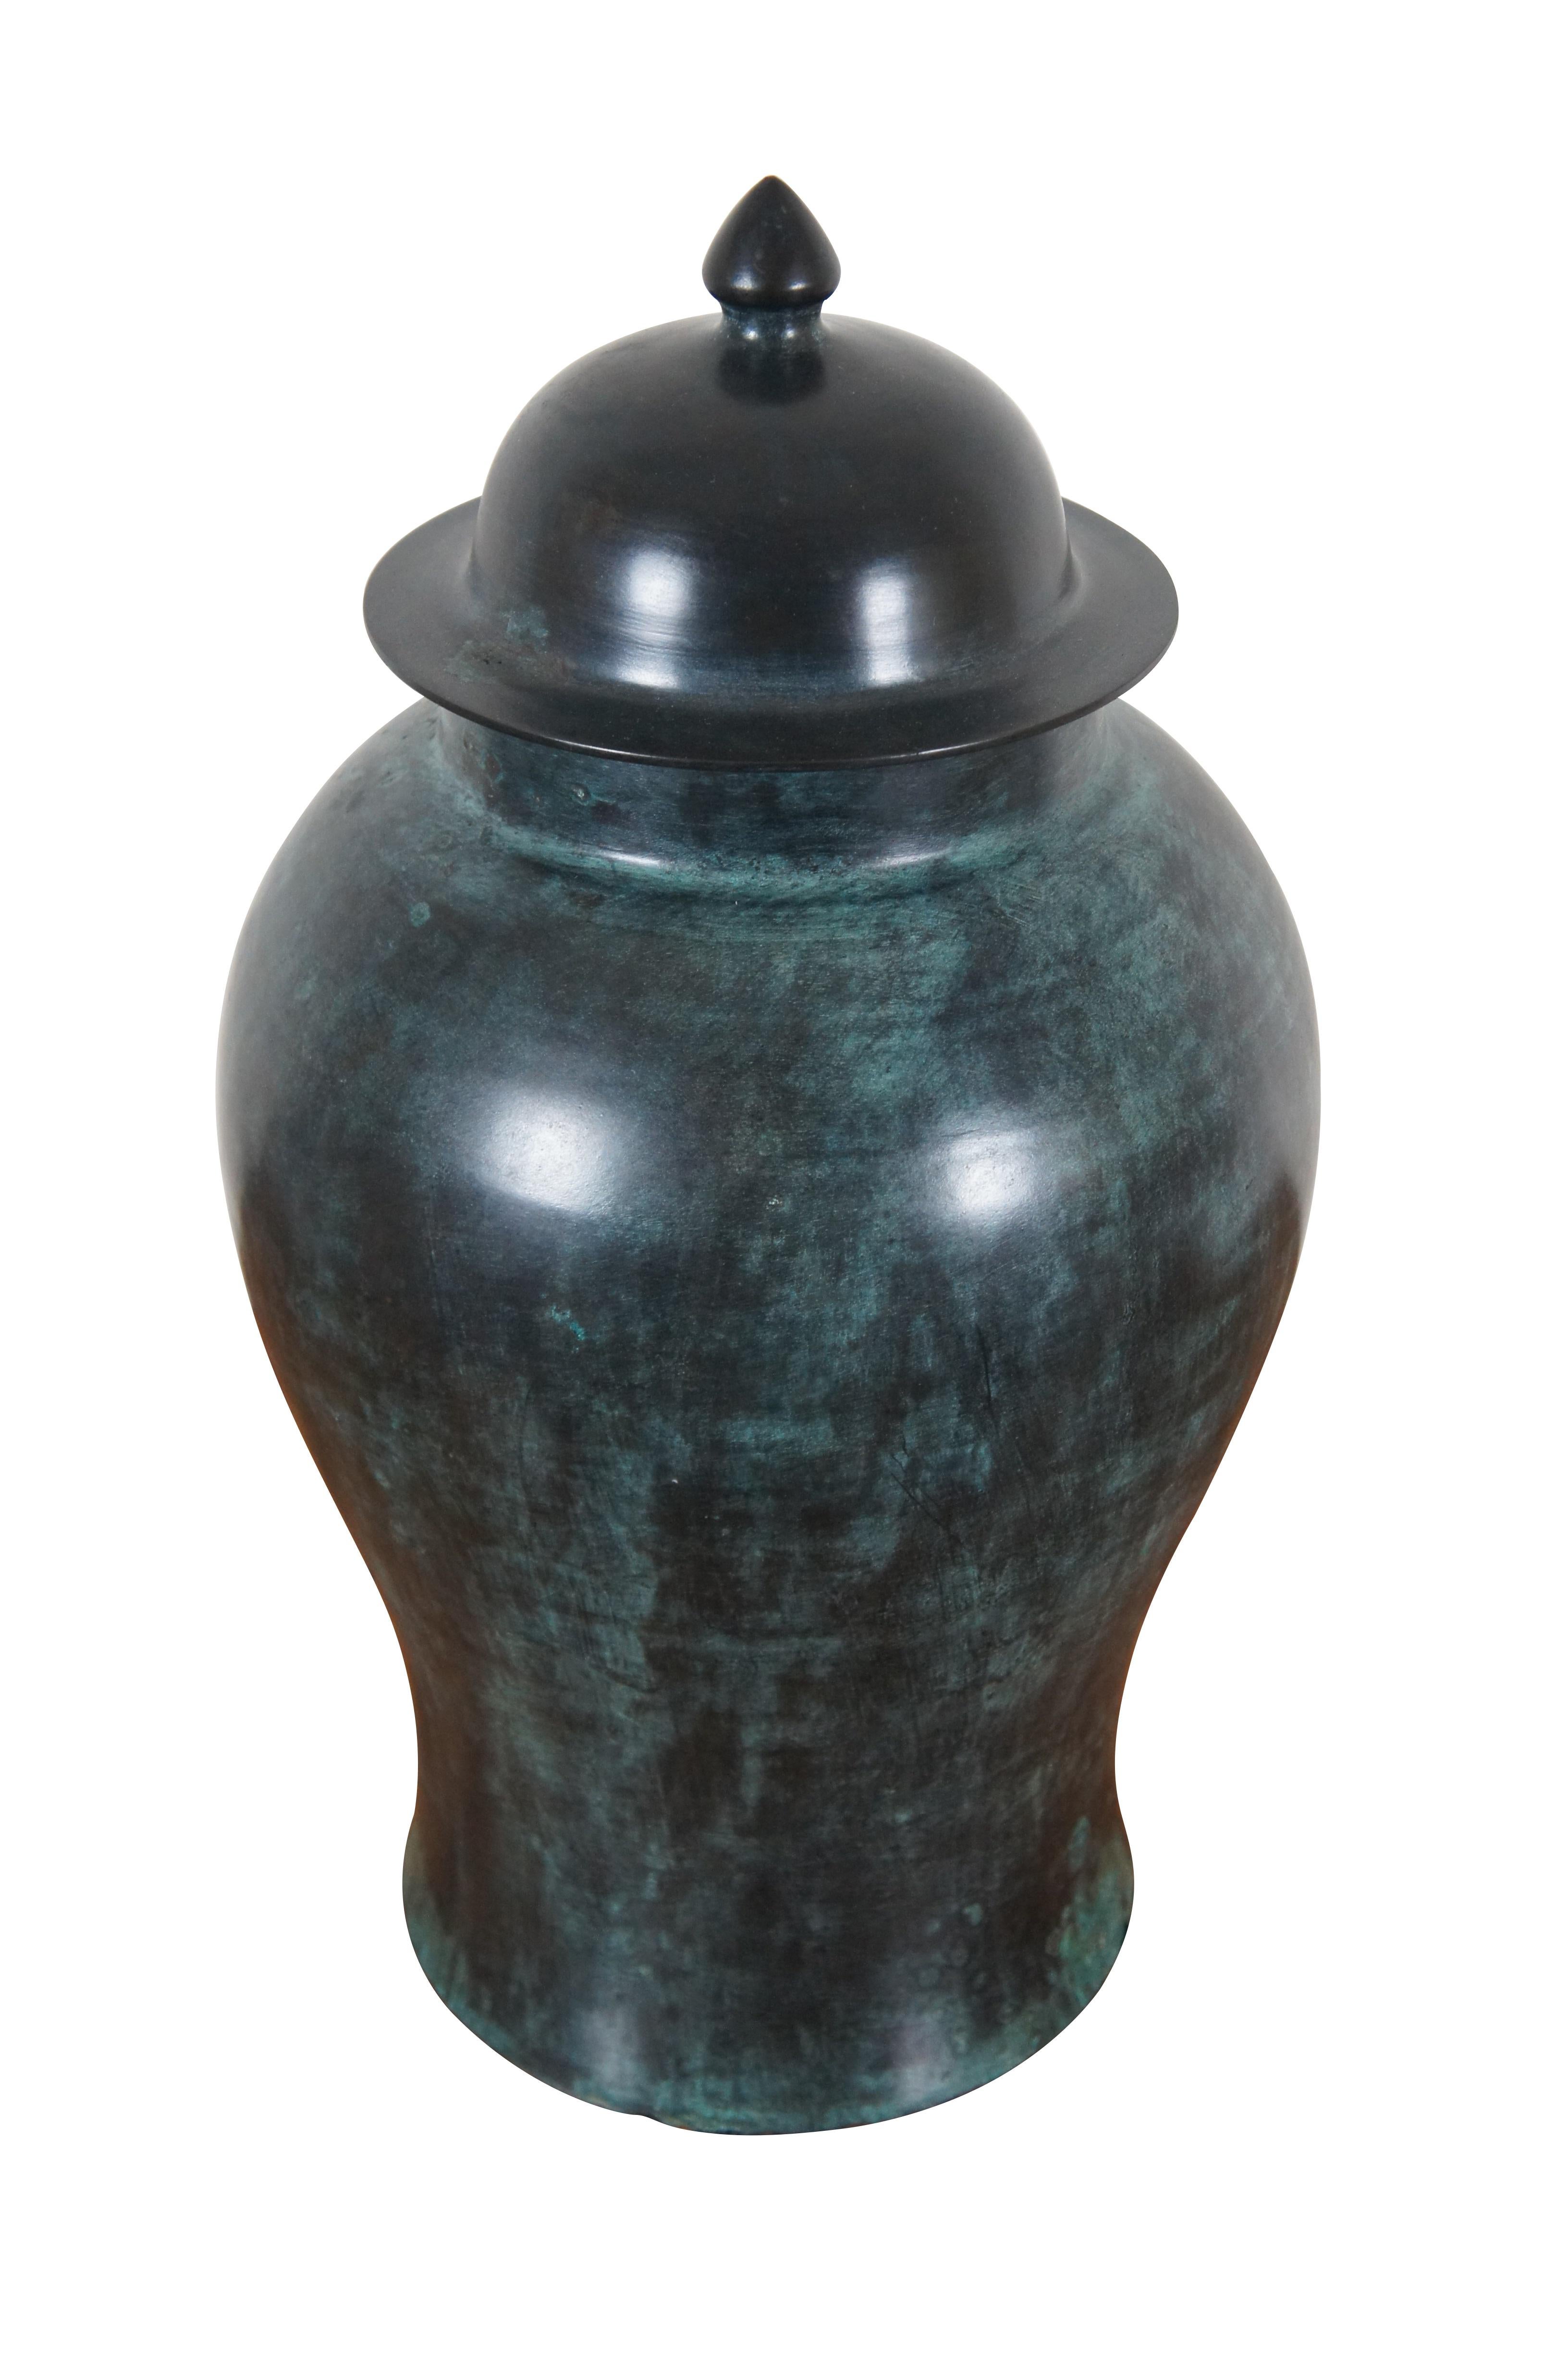 Vintage heavy bronze lidded ginger jar / urn / vase, produced by Maitland Smith.  Designed and Hand Made in Thailand. 458 XP.

Dimensions:
11